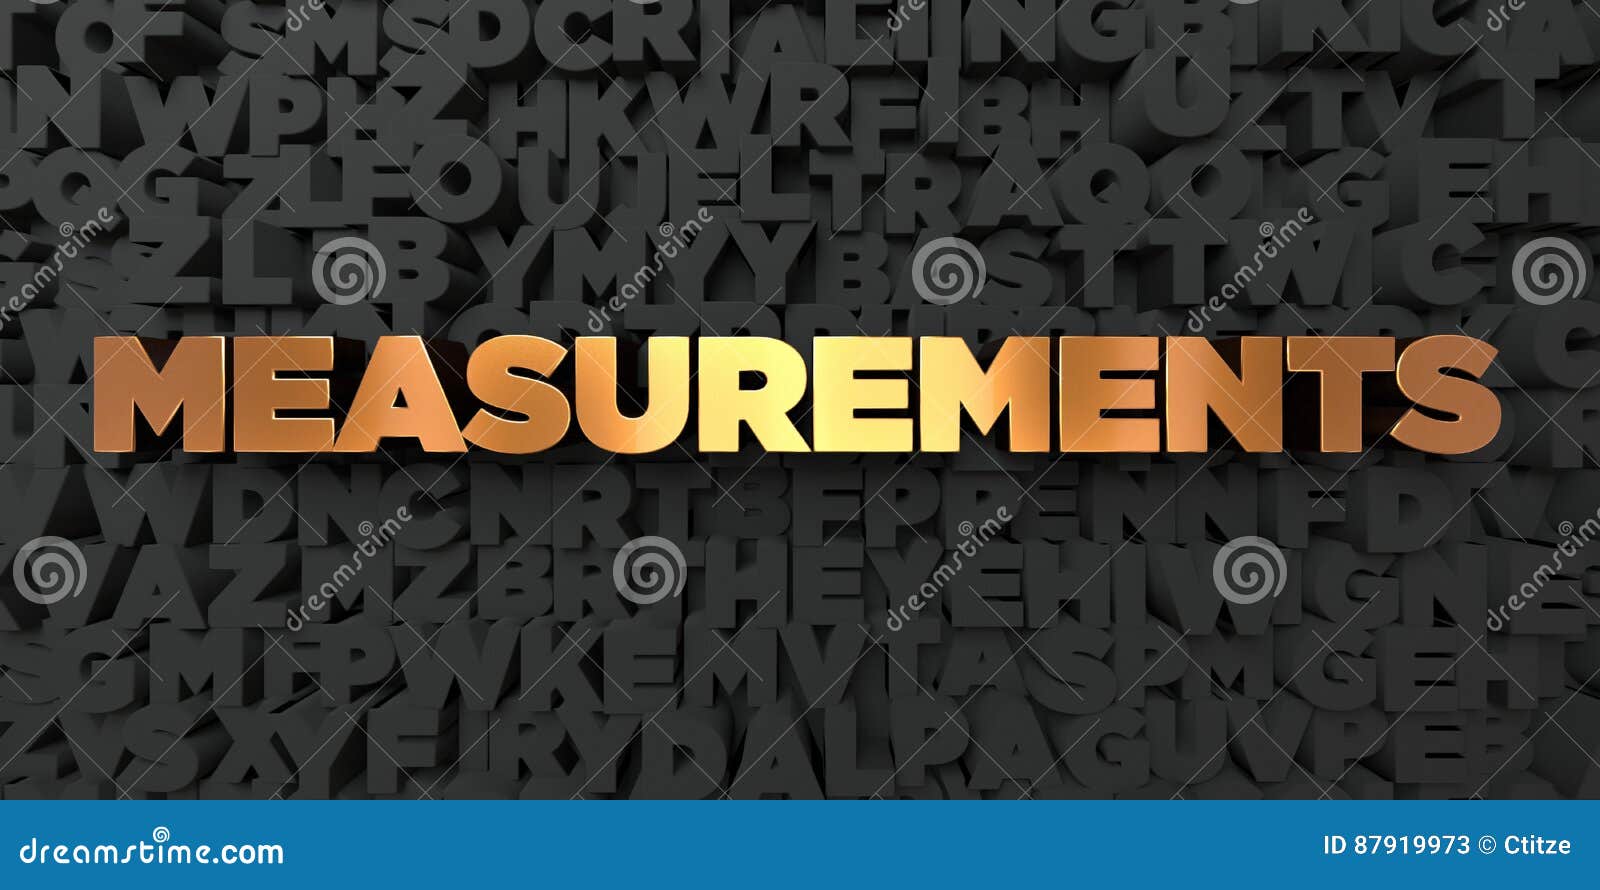 Measurements - Gold Text on Black Background - 3D Rendered Royalty Free ...